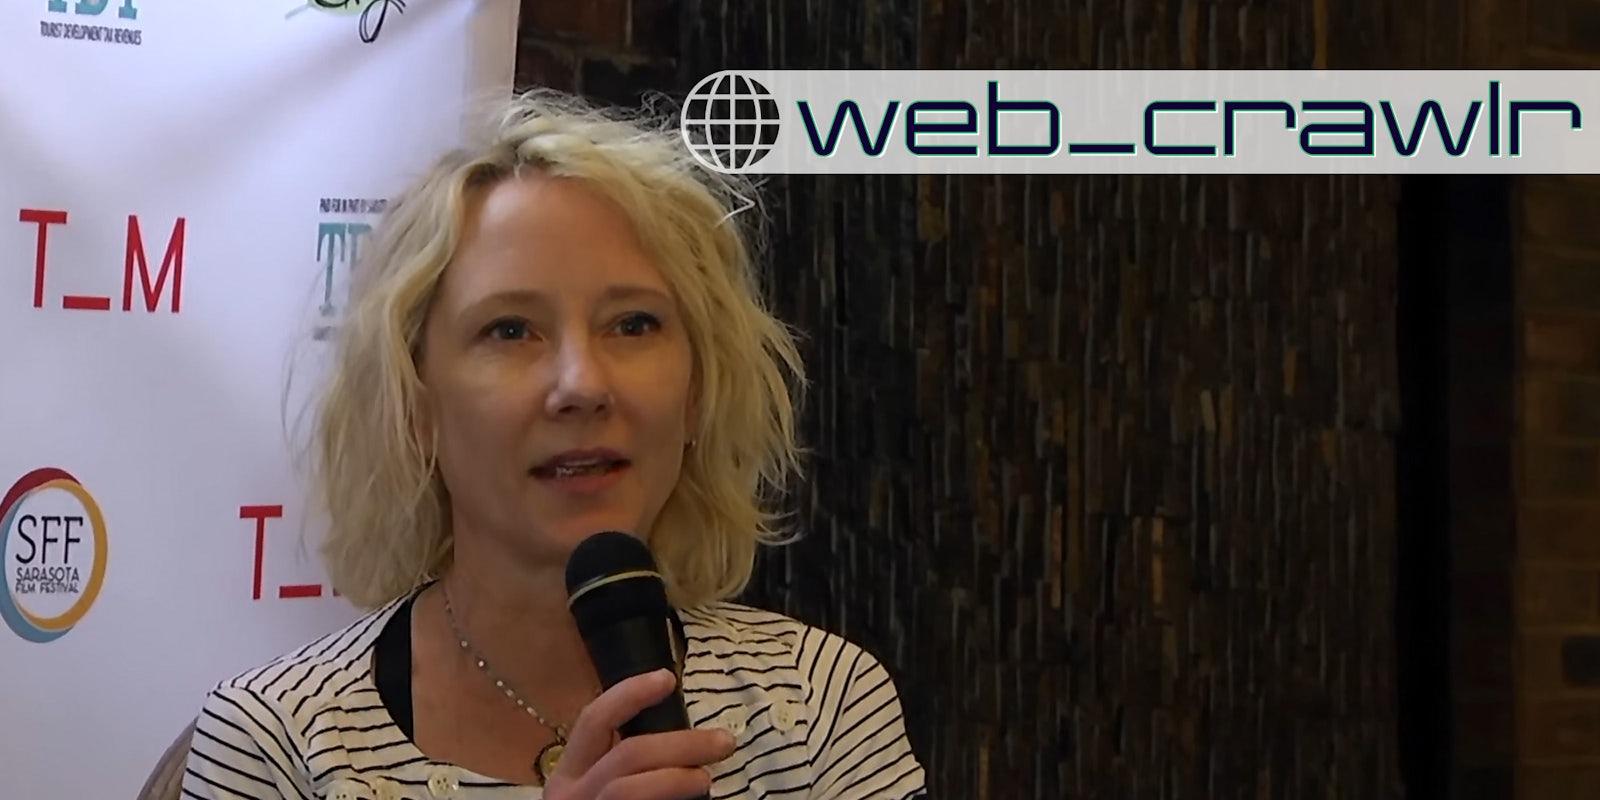 Anne Heche speaking into a microphone. The Daily Dot newsletter web_crawlr logo is in the top right corner.